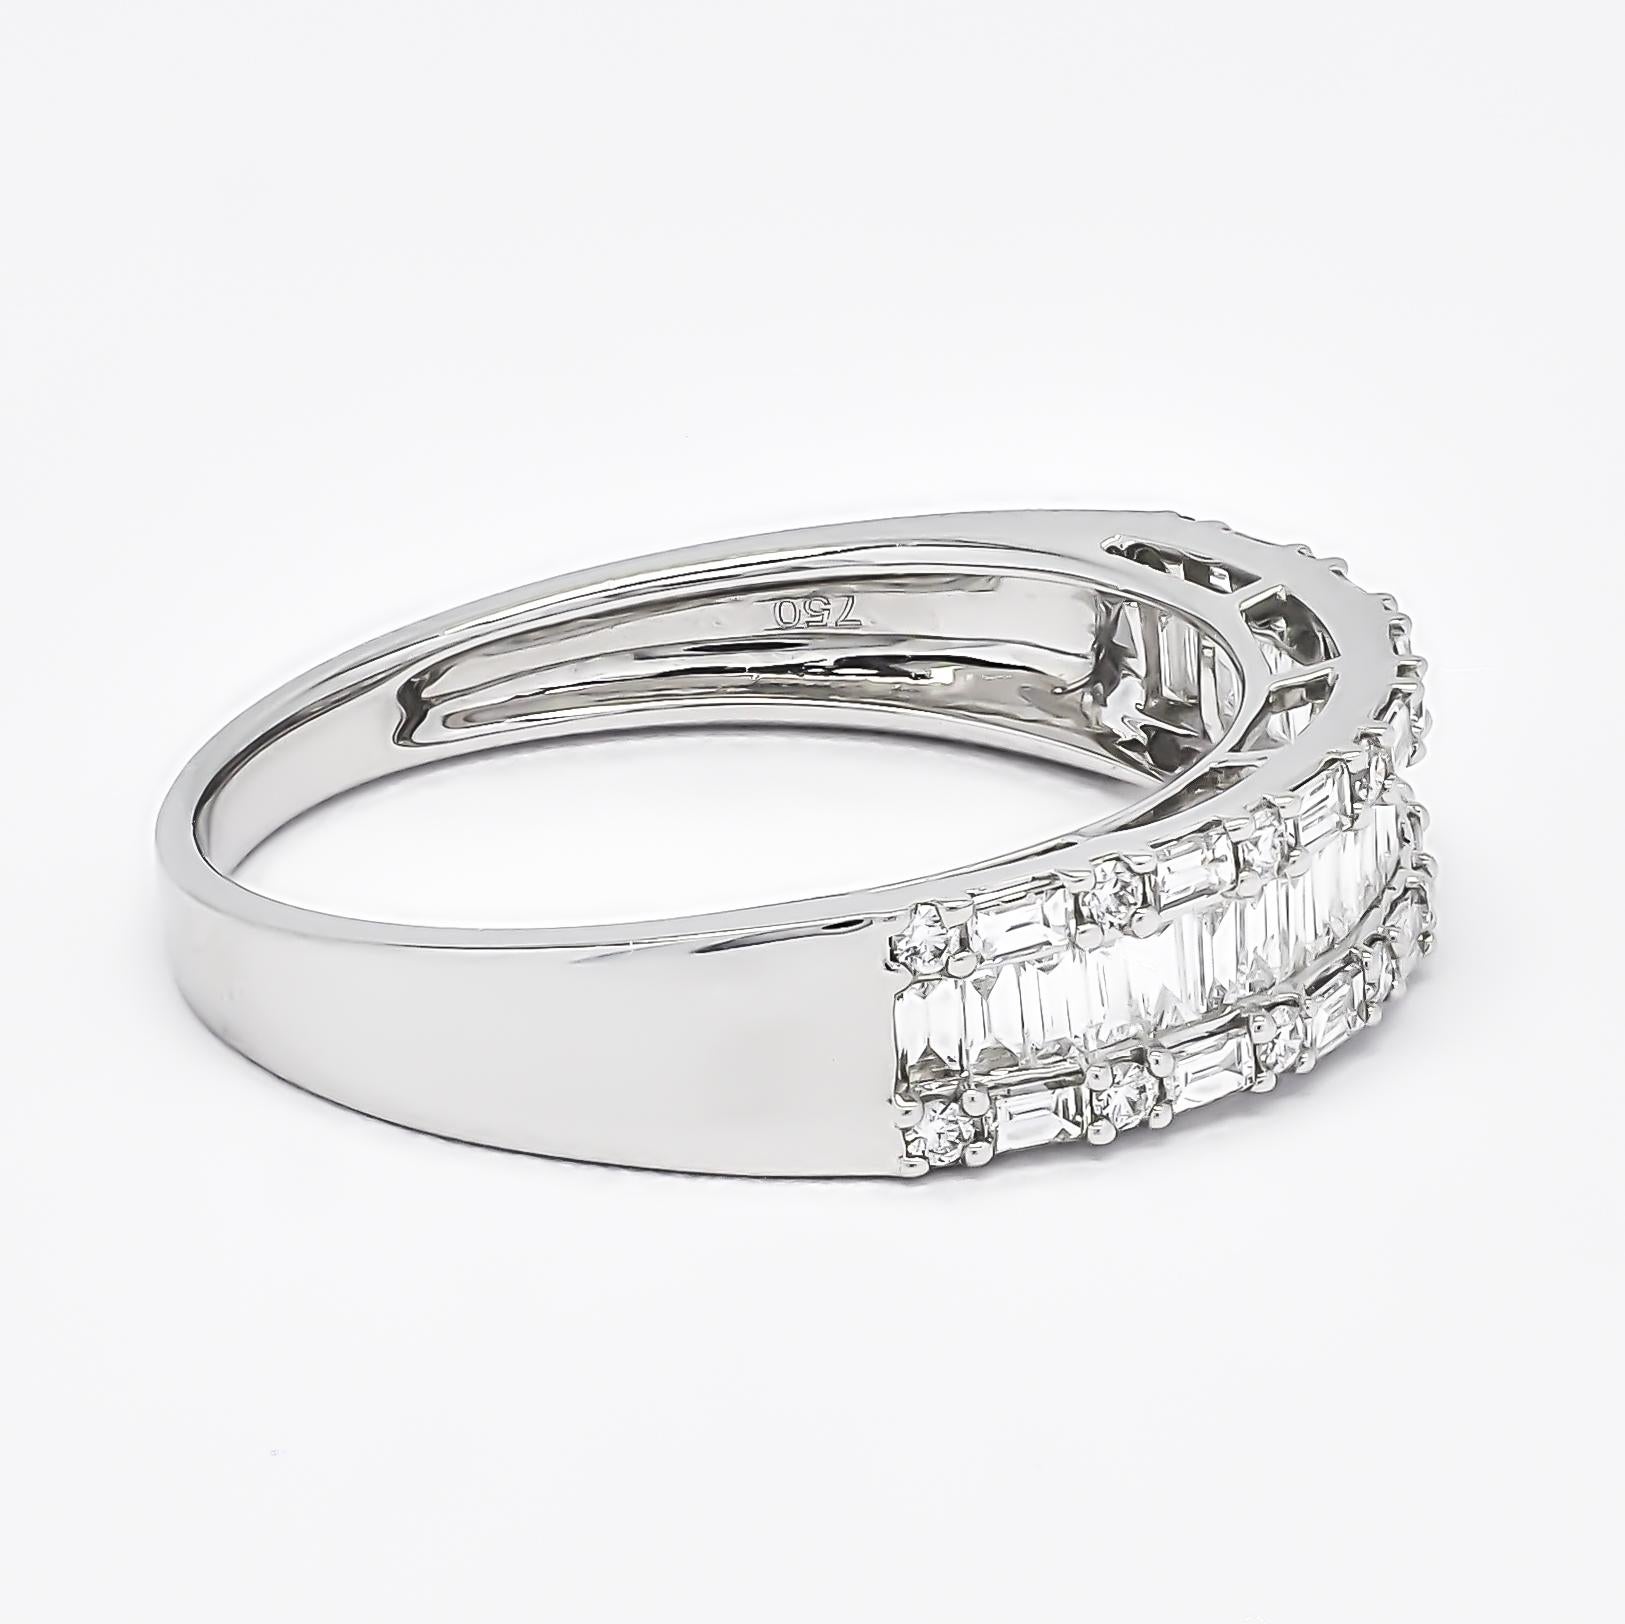 For Sale:  Exclusive Design 0.70 Carat Baguette Diamond Wedding Ring in White Gold 2